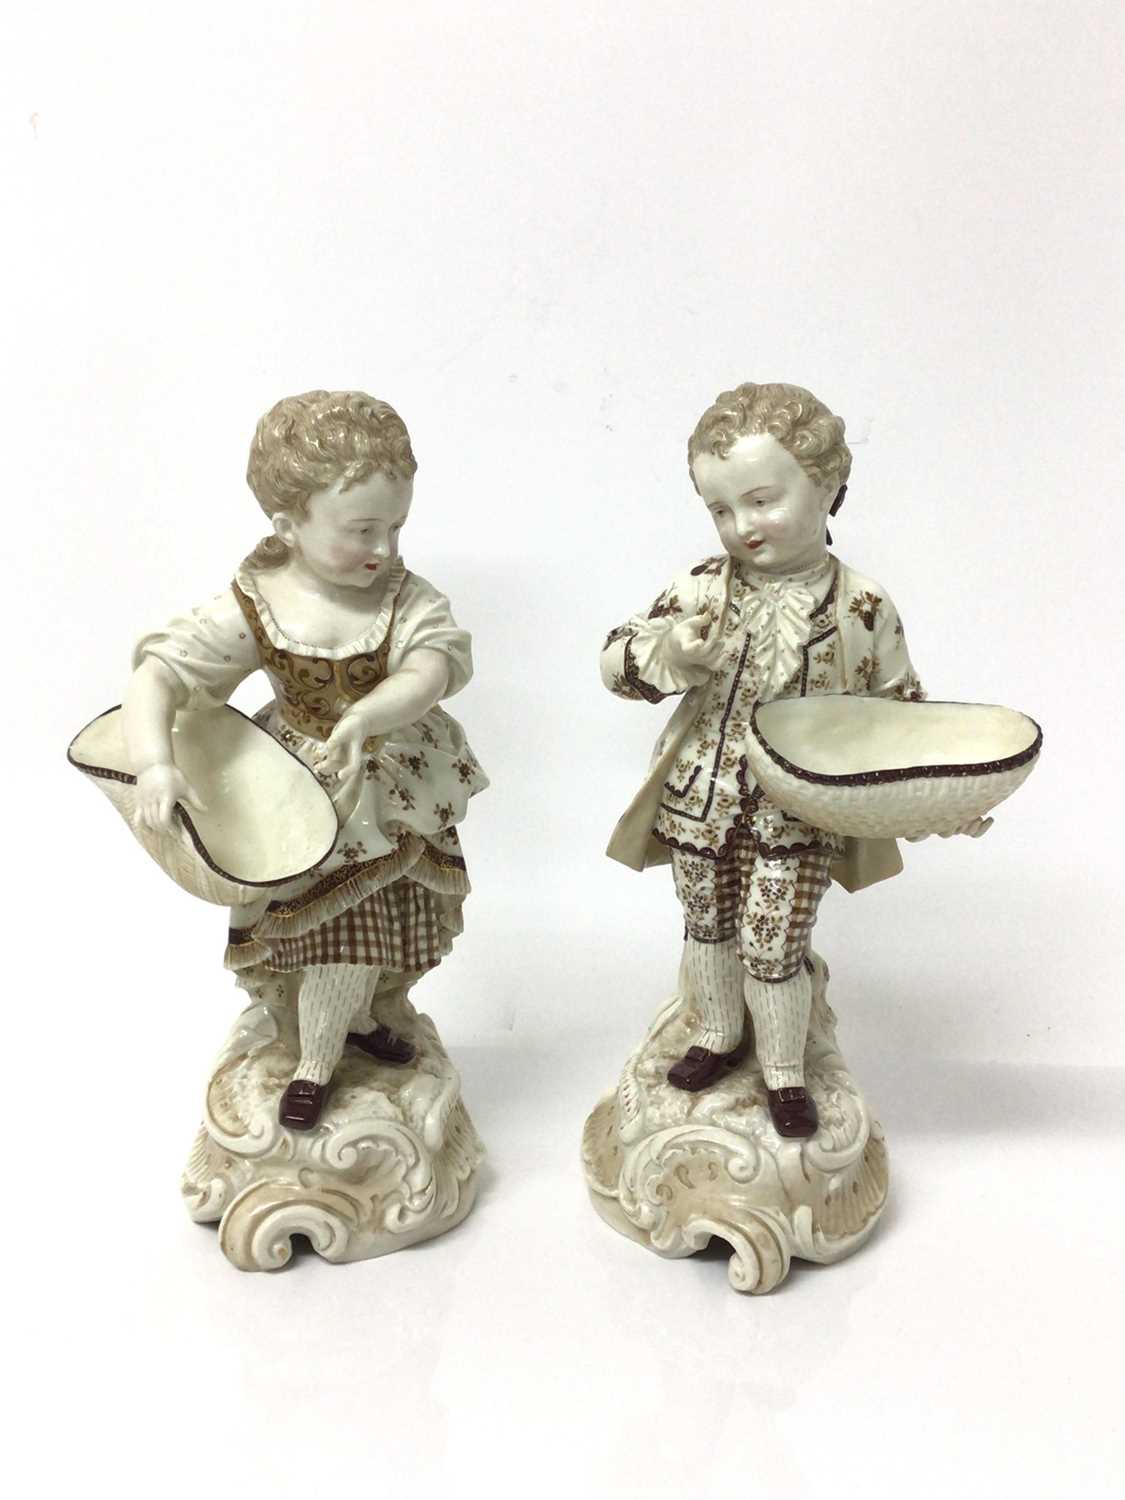 Lot 8 - Pair of continental porcelain figures of a boy and girl, shown holding baskets, on scrollwork bases, with gilt and enamelled decoration, marked to bases, 29cm high